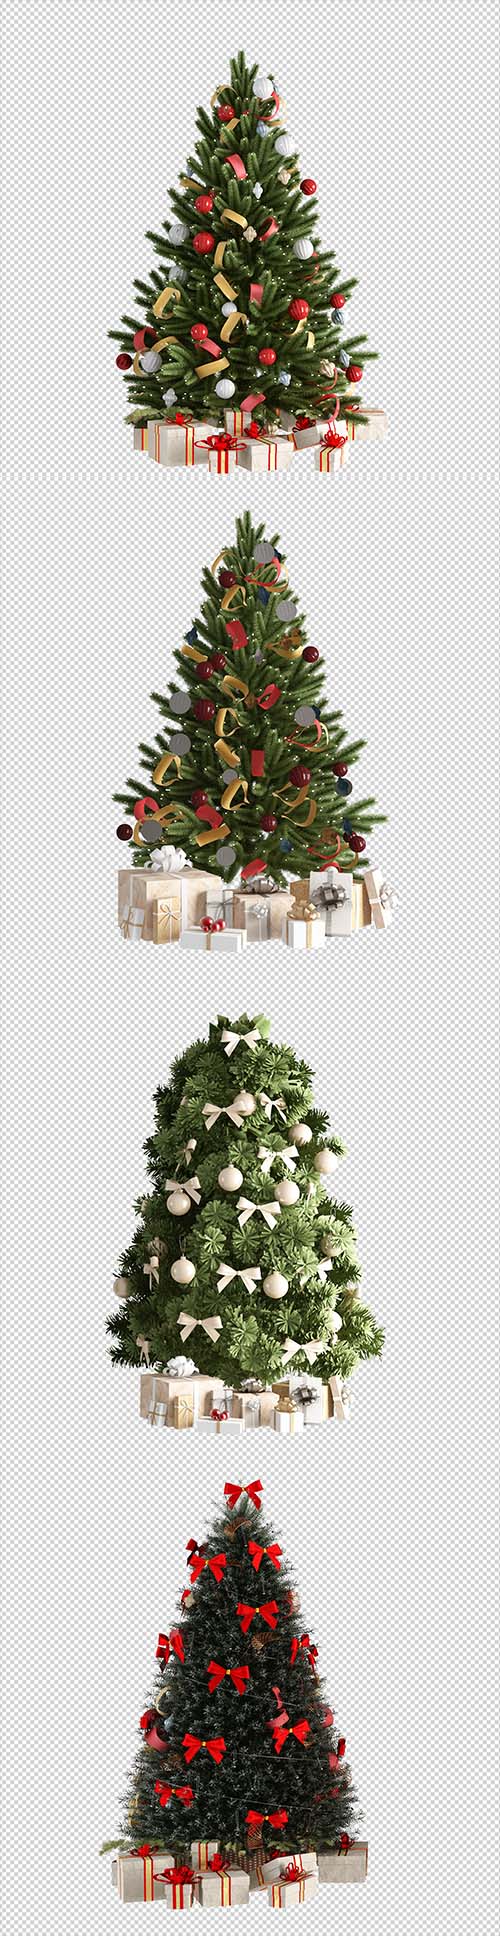 PSD Christmas tree, gifts and armchair in 3d rendered isolated